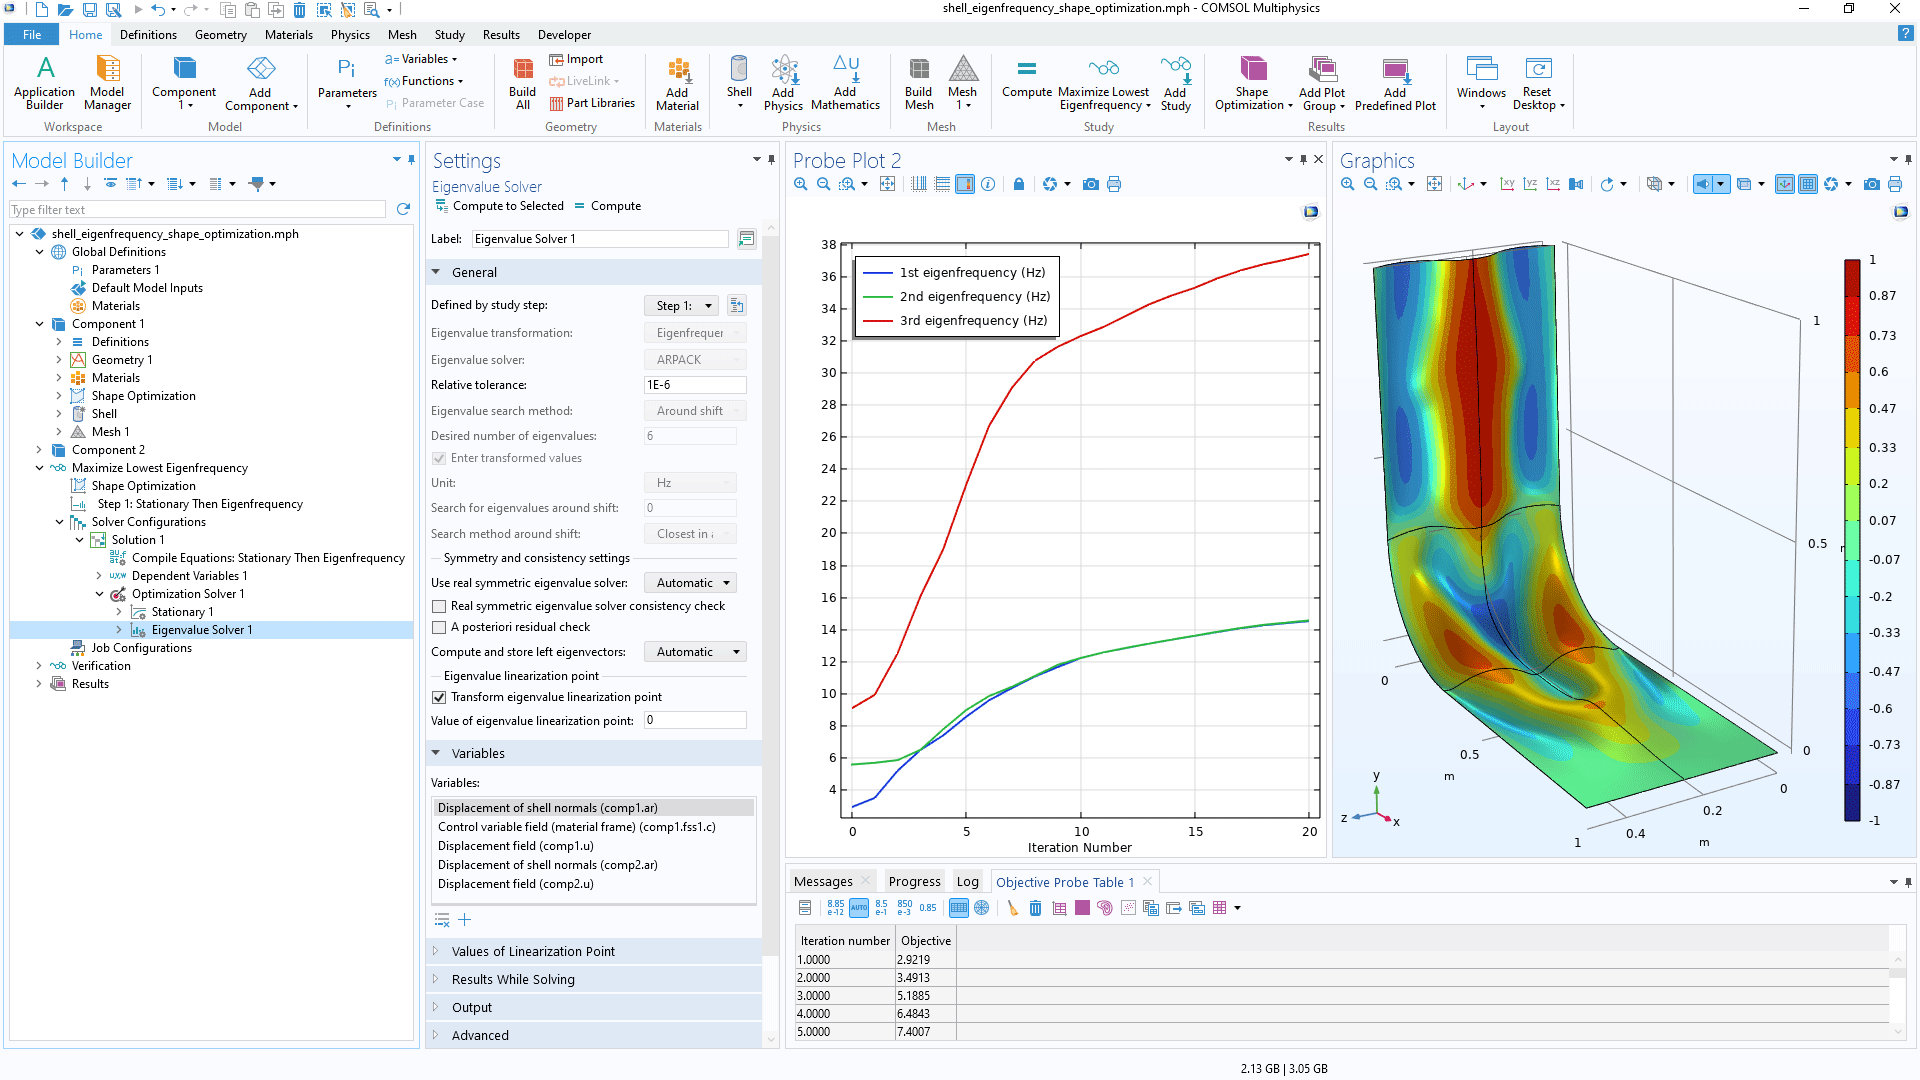 The COMSOL Multiphysics UI showing the Model Builder with the Eigenvalue Solver node highlighted, the corresponding Settings window, and two Graphics windows.